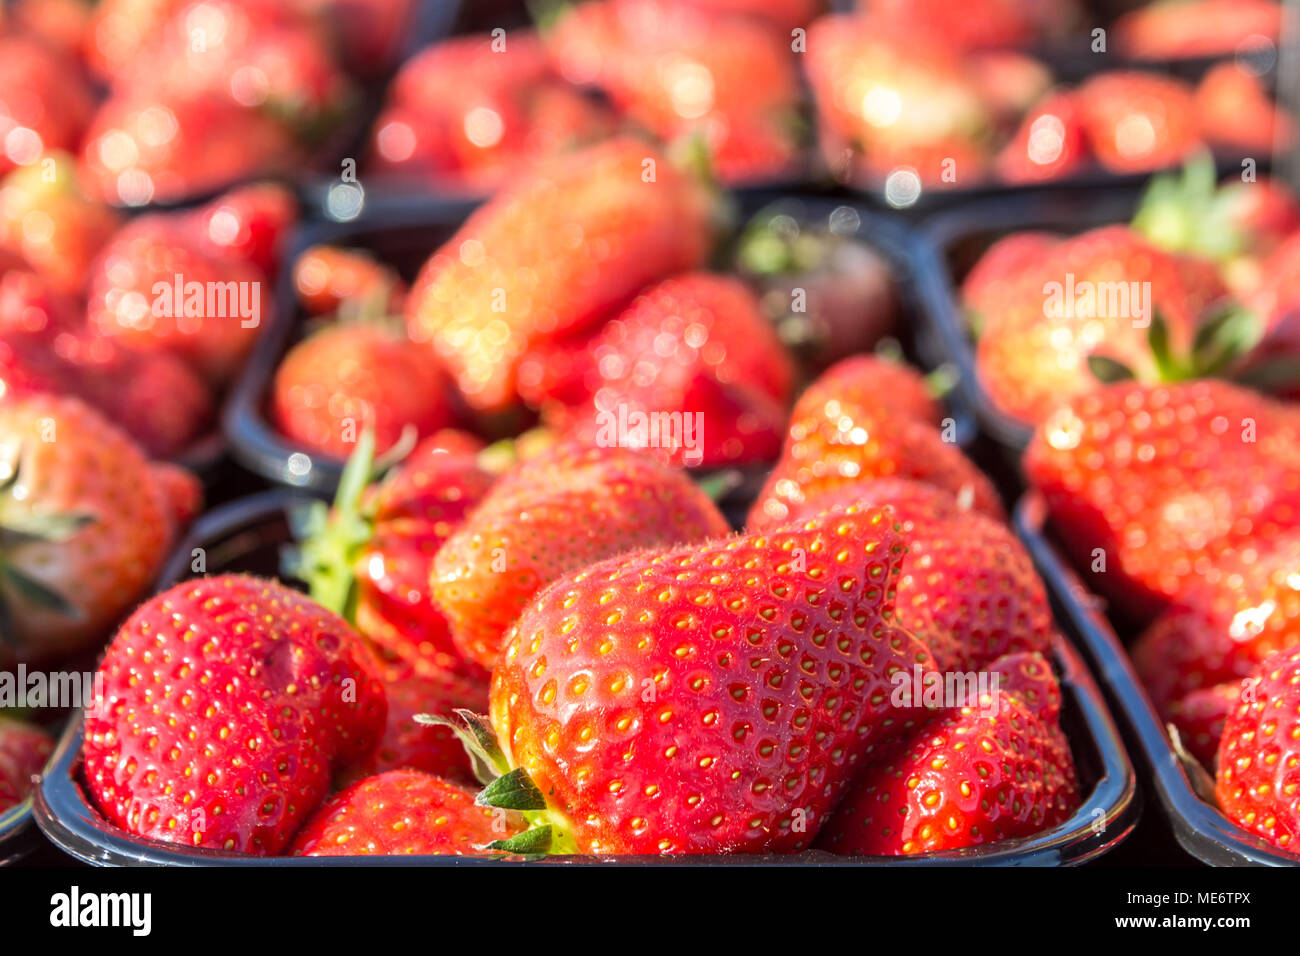 boxes of fresh delicious ripe red strawberries Stock Photo